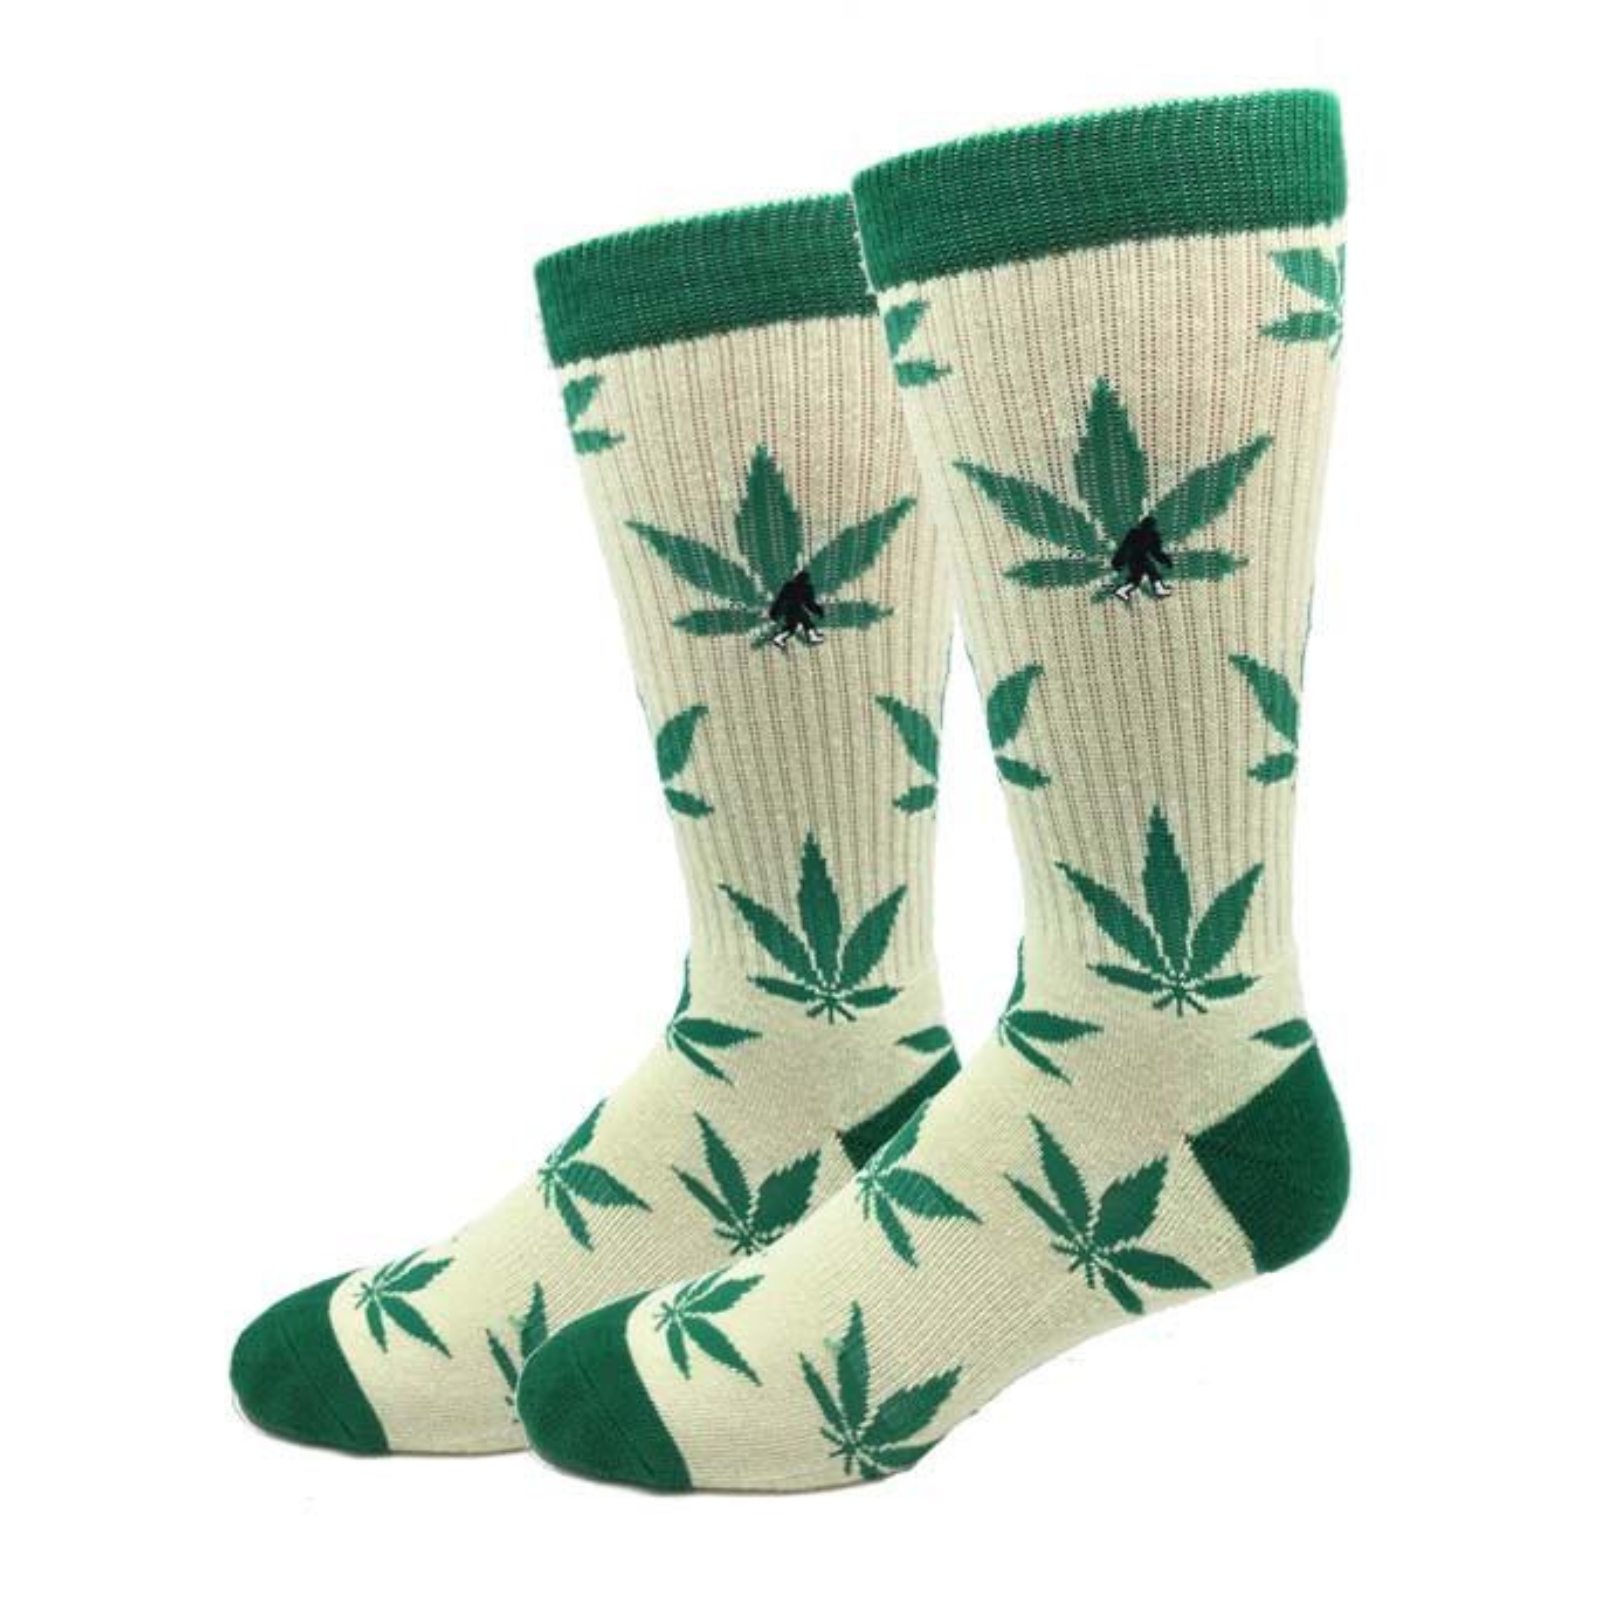 Sock Harbor High There Active men's sock featuring green cuff, heel and toe with cannabis leaves all over